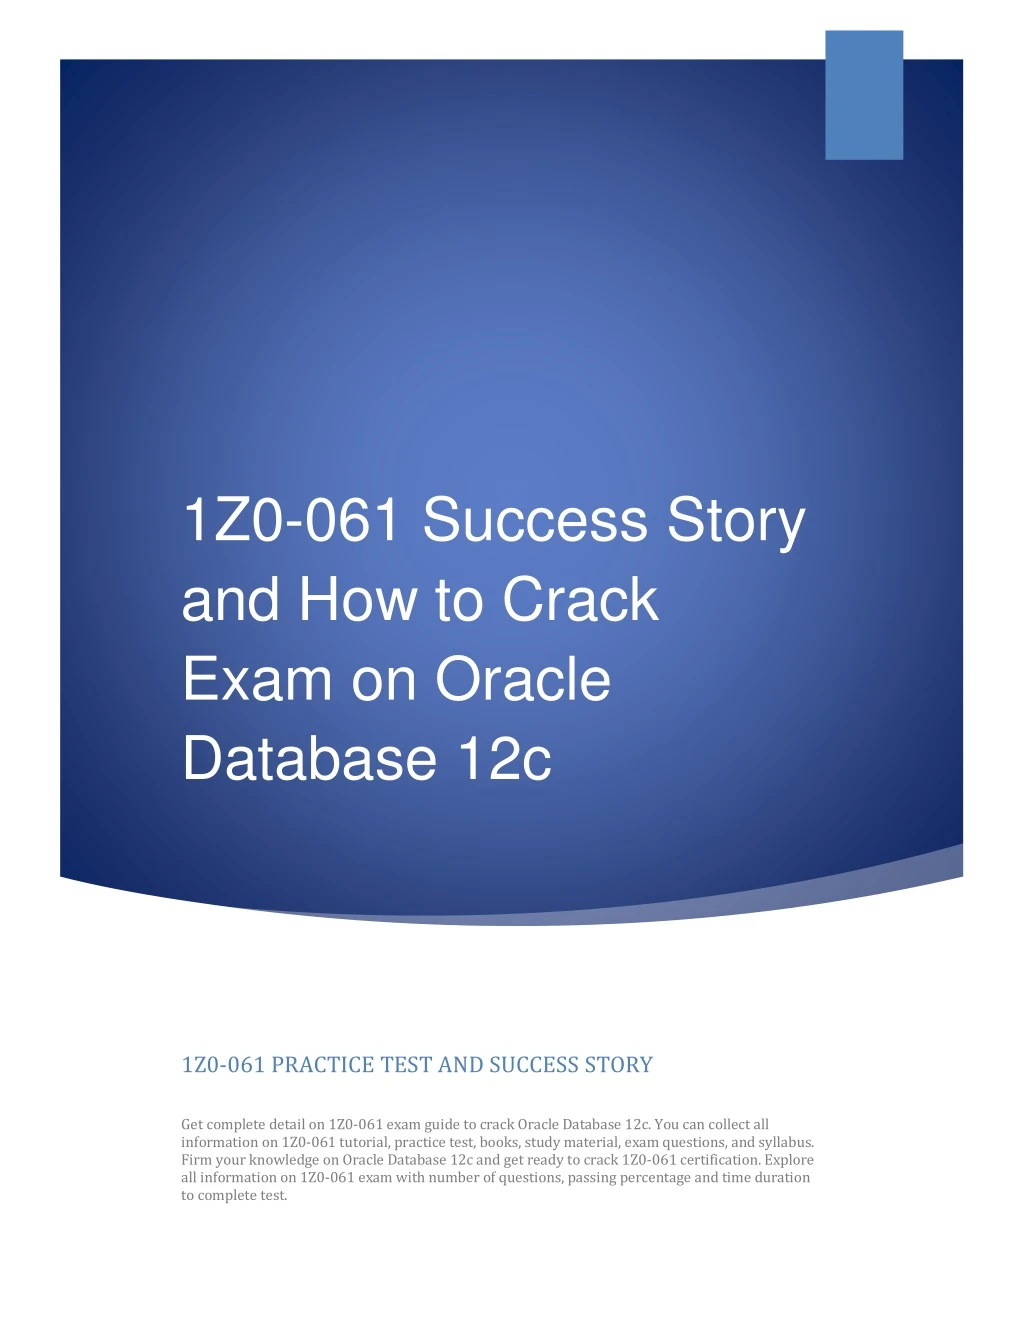 1z0 061 success story and how to crack exam